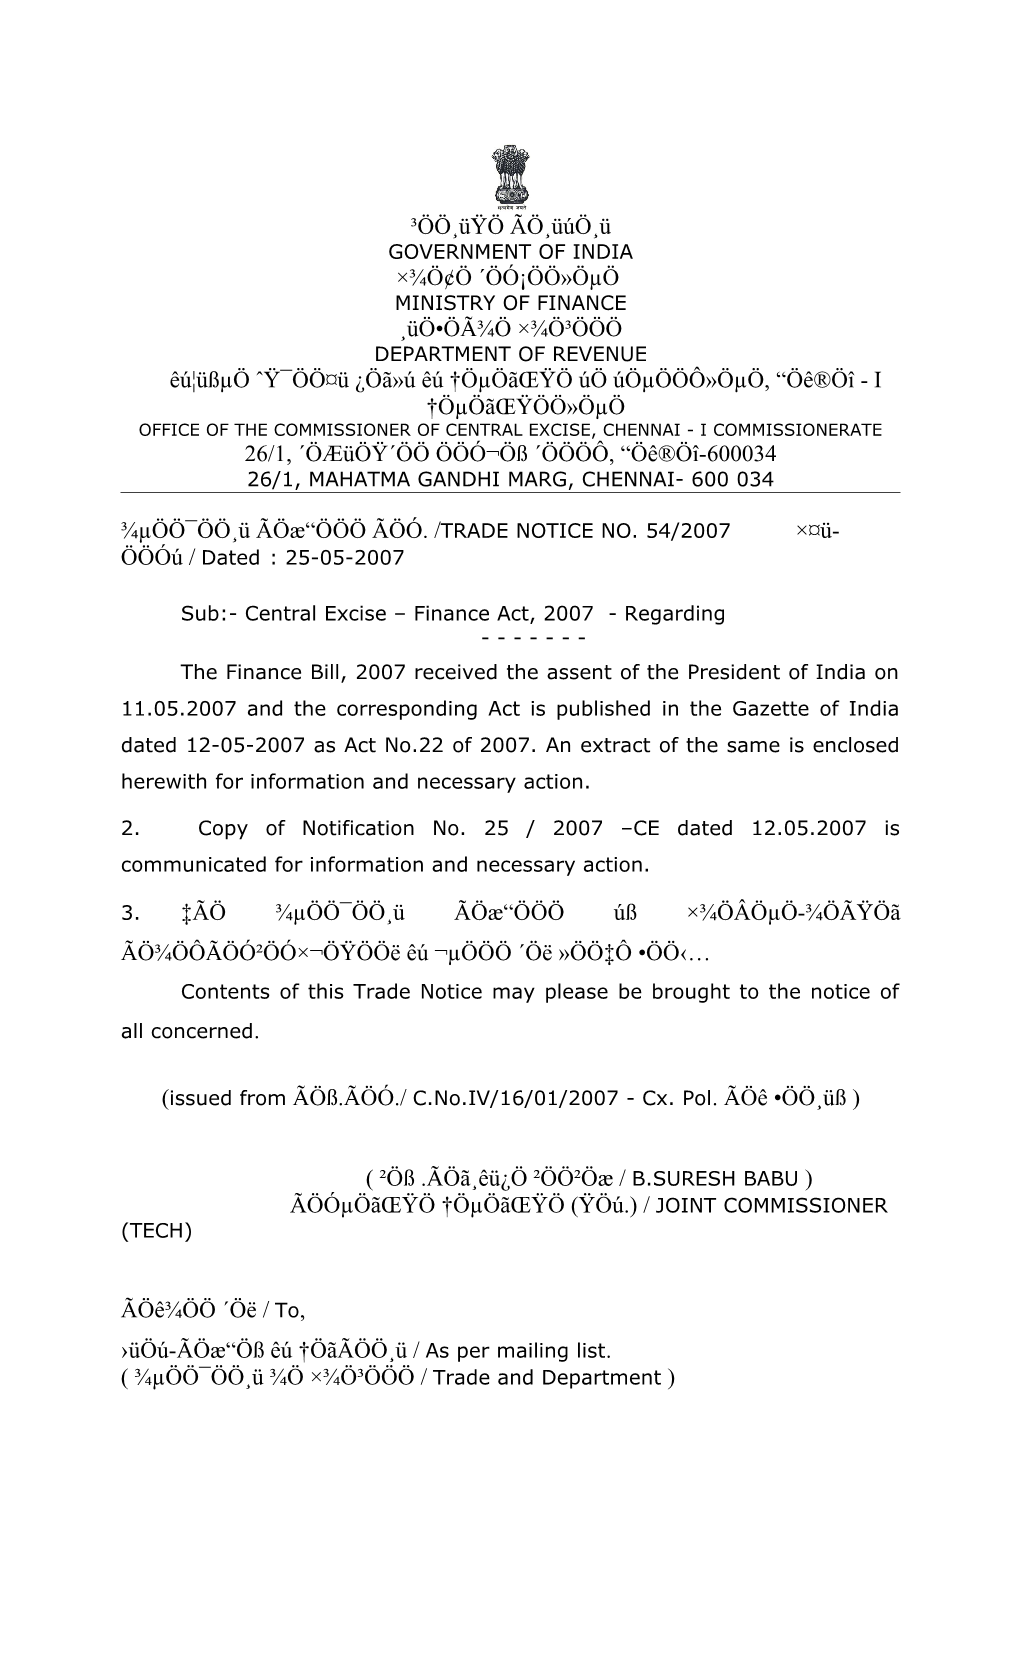 Office of the Commissioner of Central Excise, Chennai - I Commissionerate